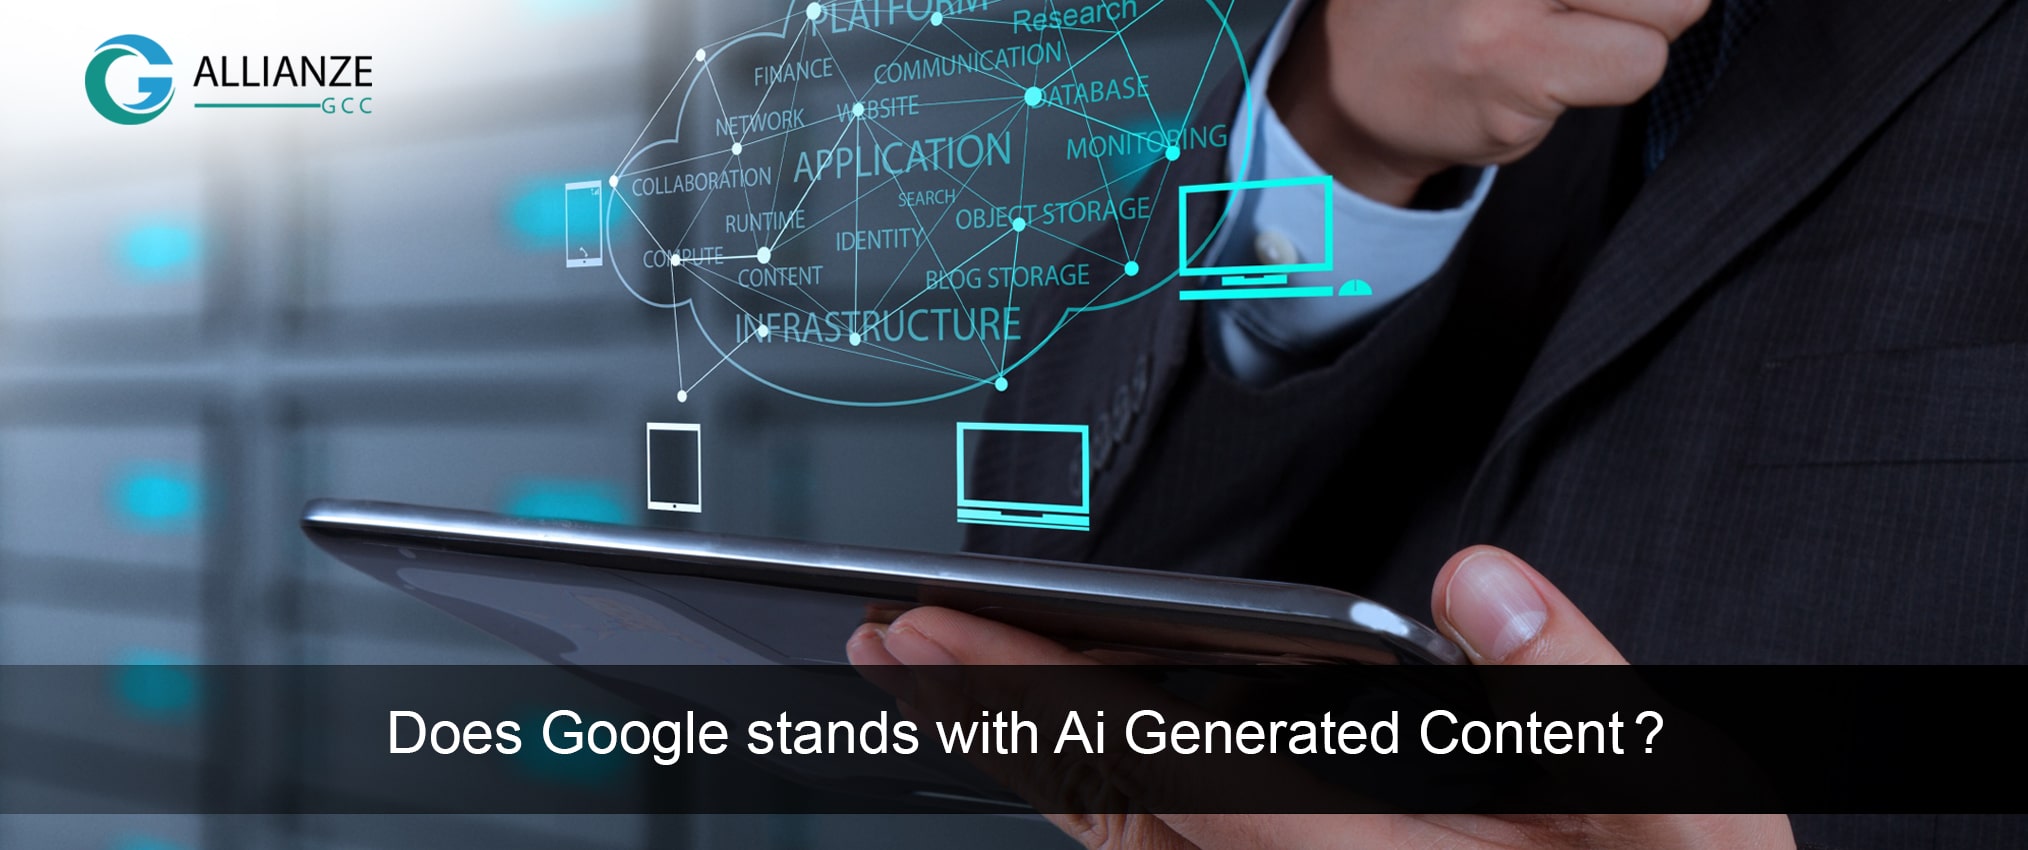 Does Google Stands with AI-Generated Content?